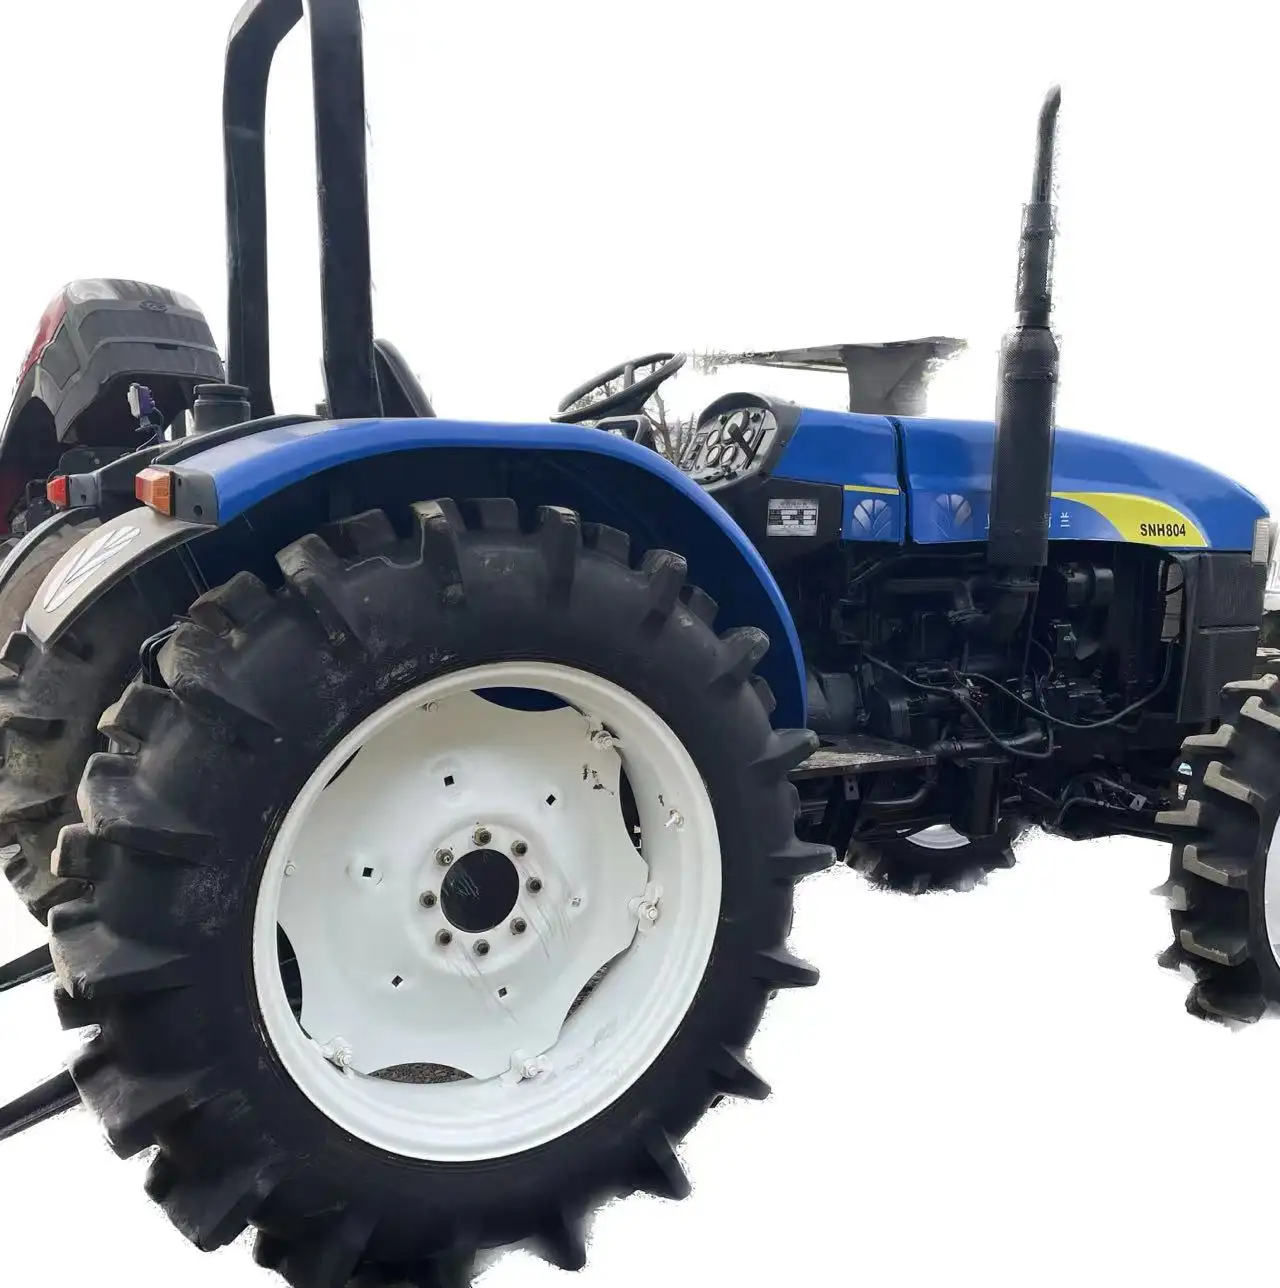 2.Original Quality New-Holland Agricultural Farm Tractor Used/second hand/new tractor 4X4wd New Holland with loader